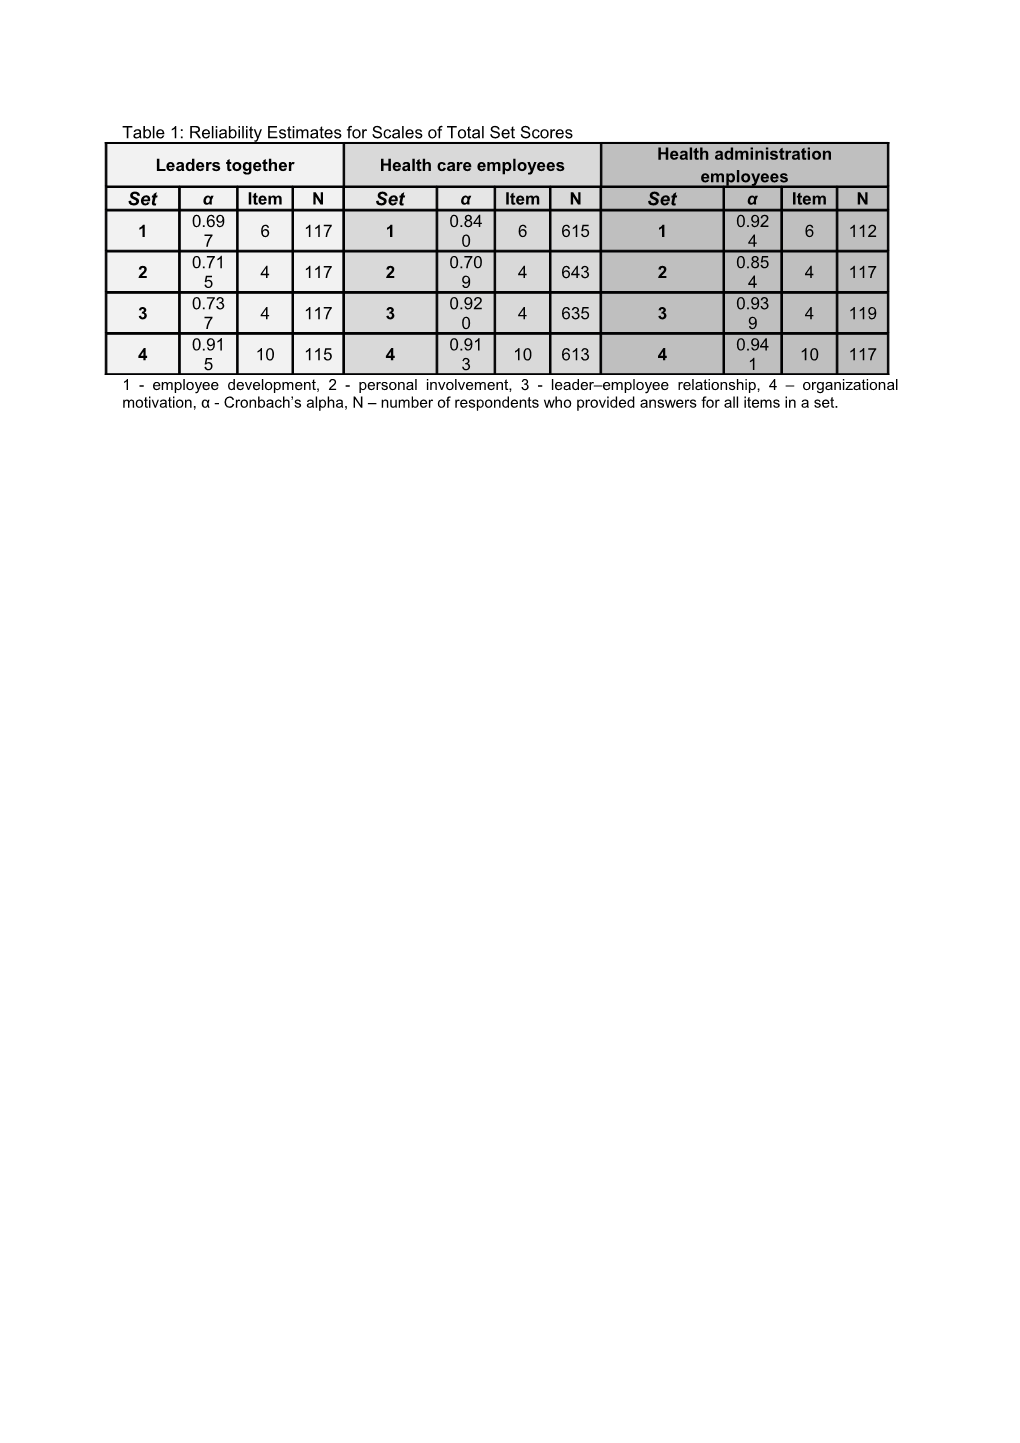 Table 1: Reliability Estimates for Scales of Total Set Scores